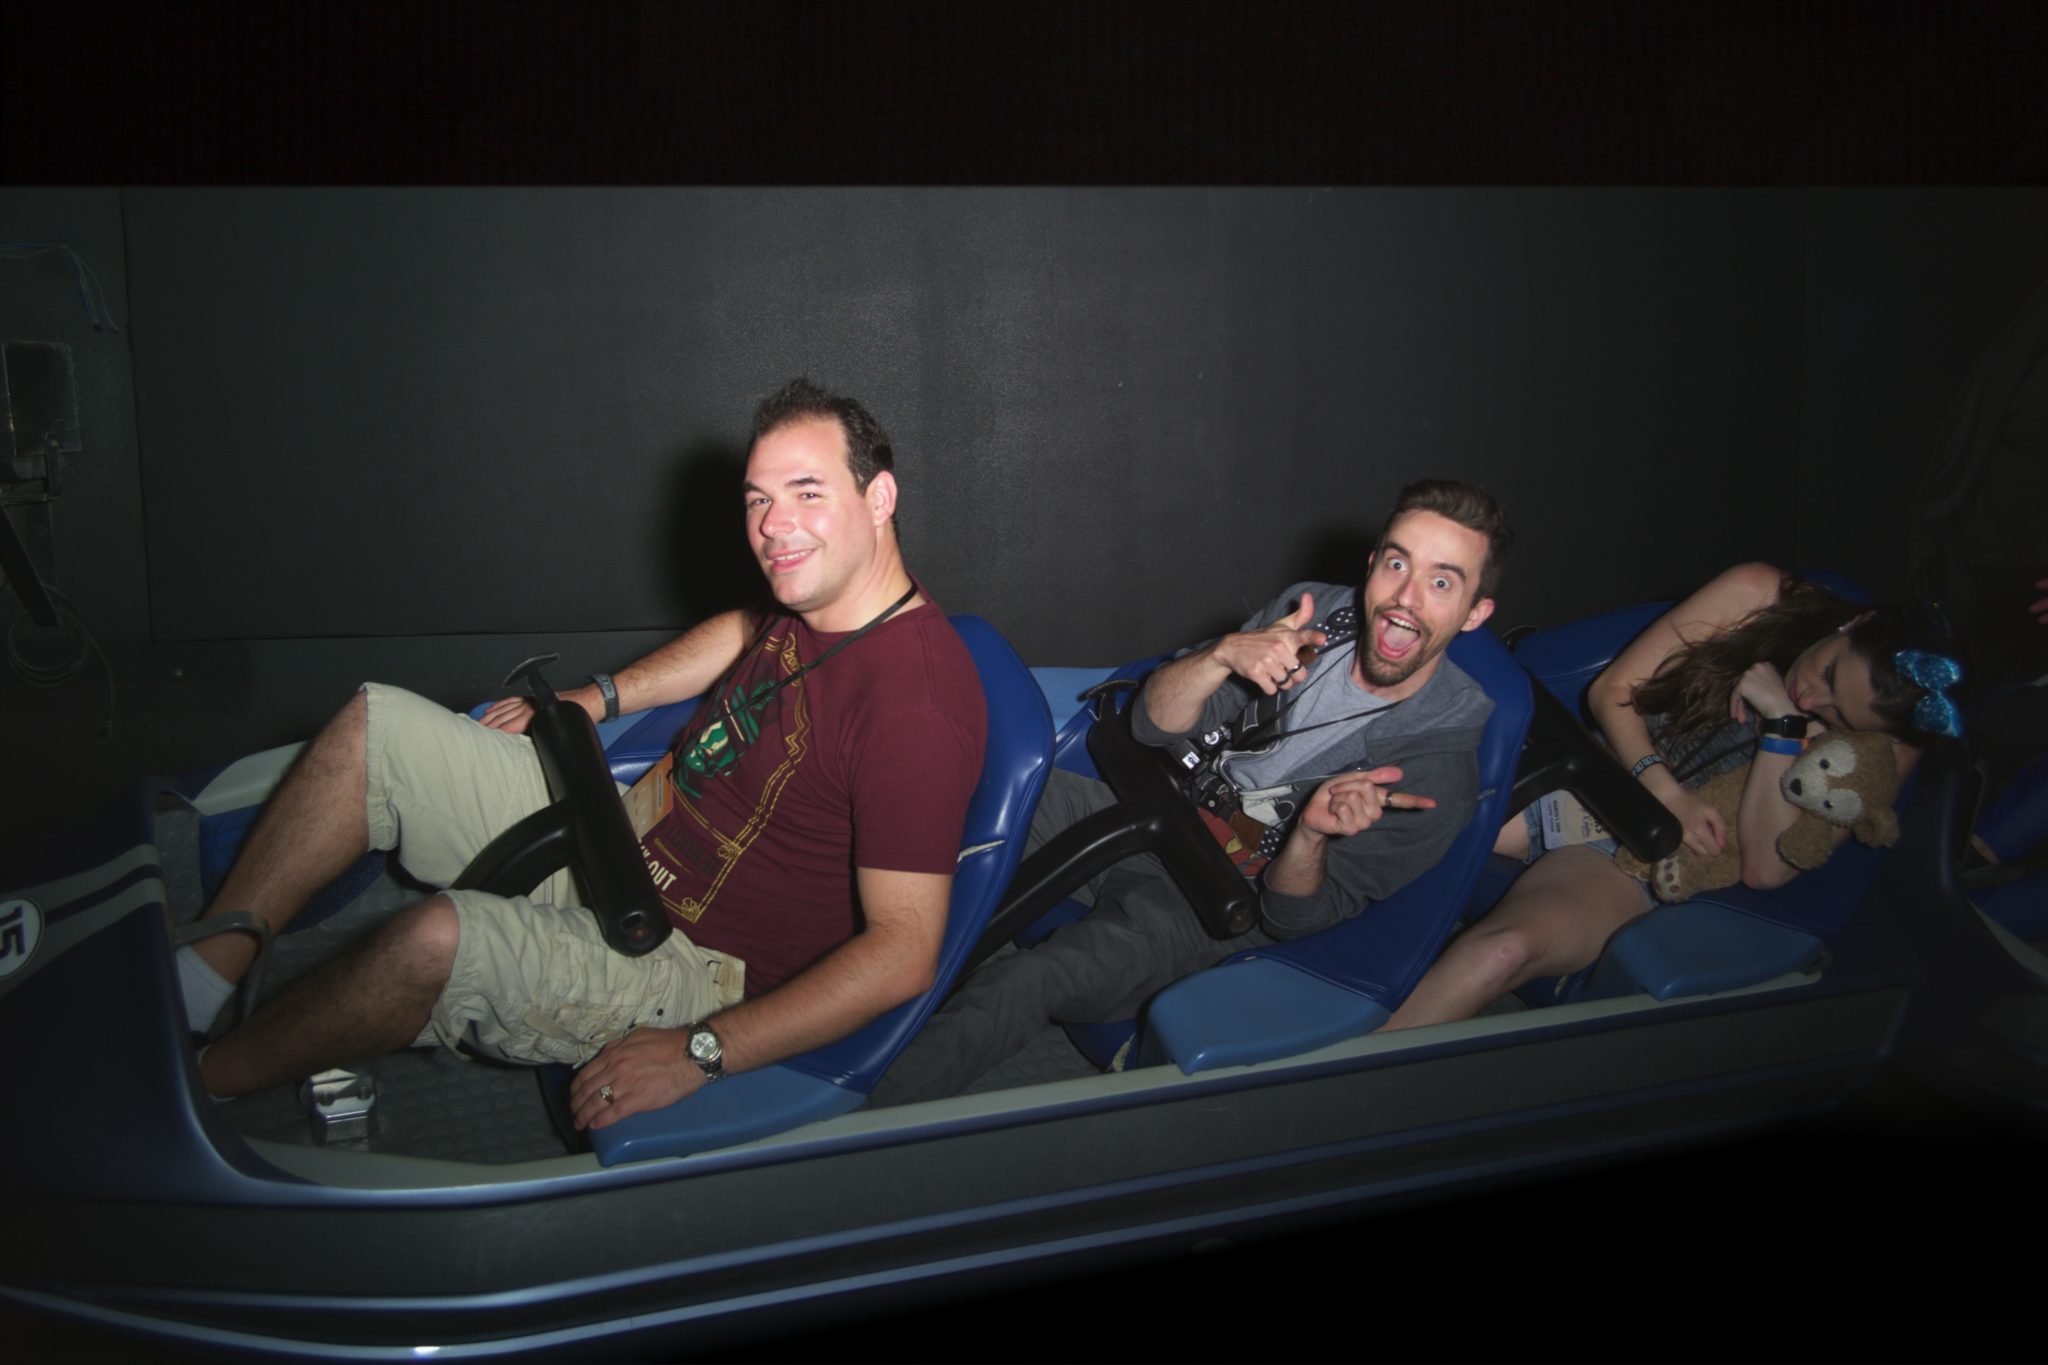 Jay, Doug, and Chelsea on Space Mountain during the After Hours event.